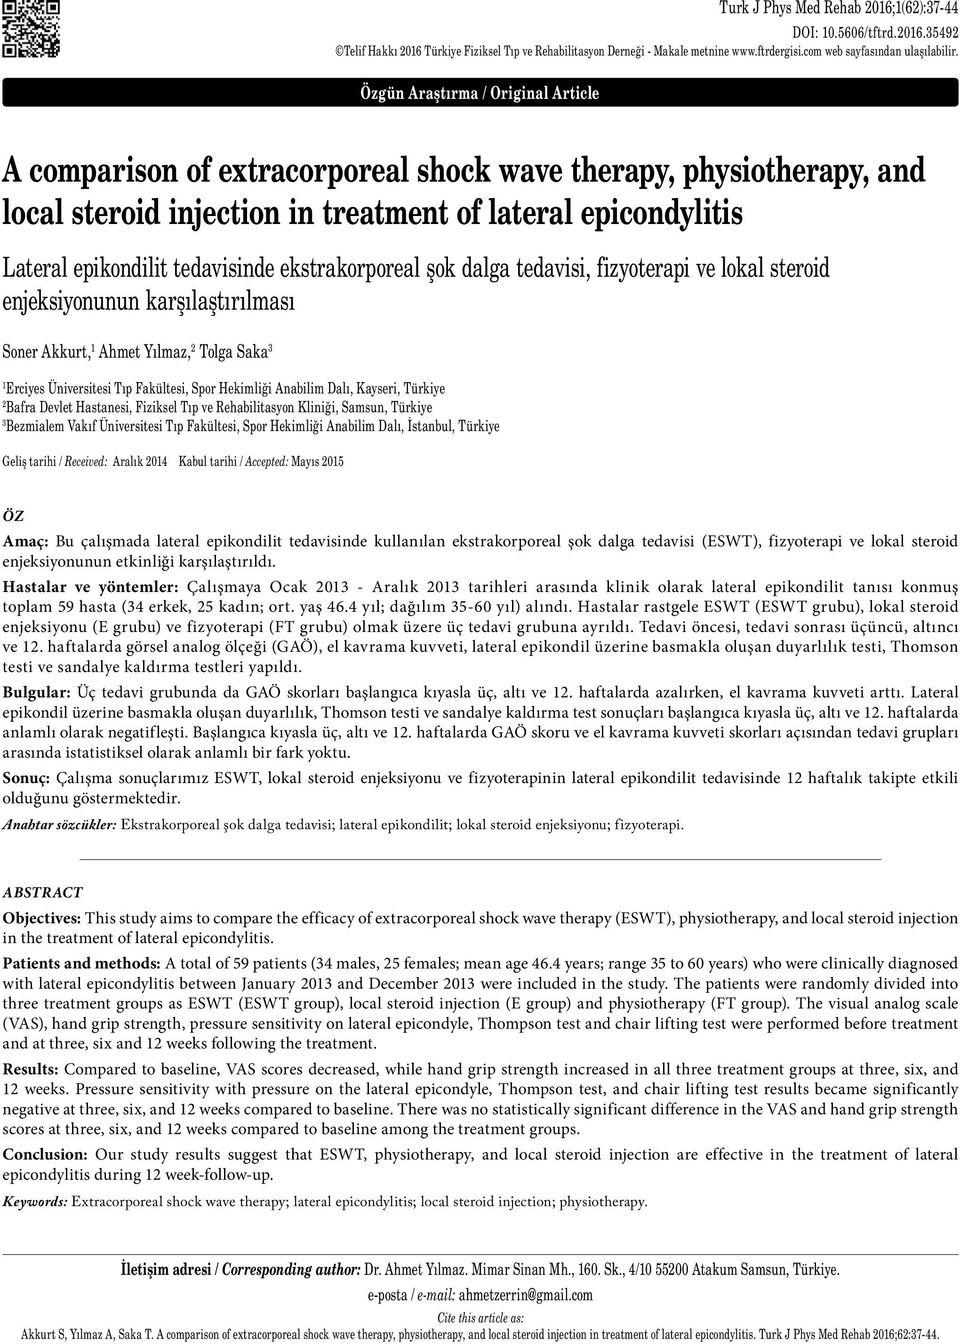 A comparison of extracorporeal shock wave therapy, physiotherapy, and local steroid injection in treatment of lateral epicondylitis Lateral epikondilit tedavisinde ekstrakorporeal şok dalga tedavisi,